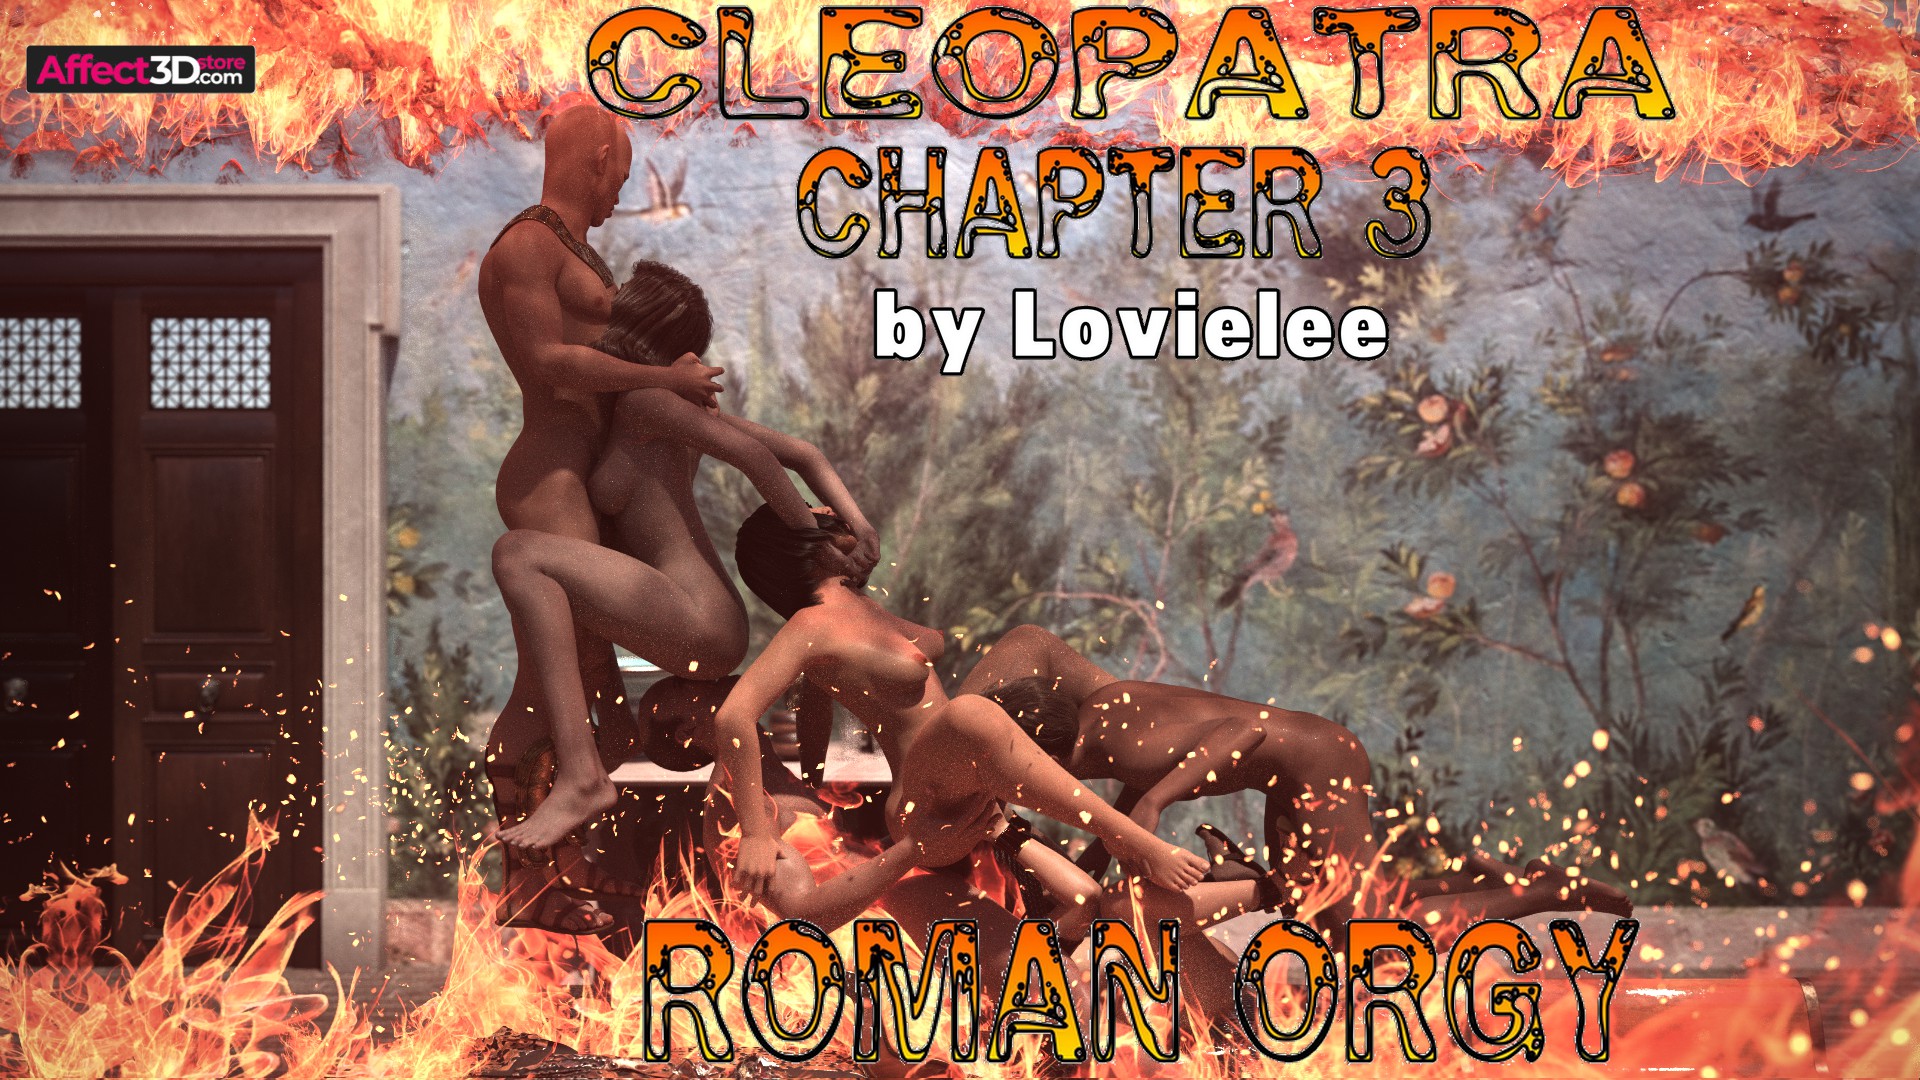 Egyptian Dick Ahoy in Lovielee's Cleopatra Chapter 3: Roman Orgy -  Affect3D.com